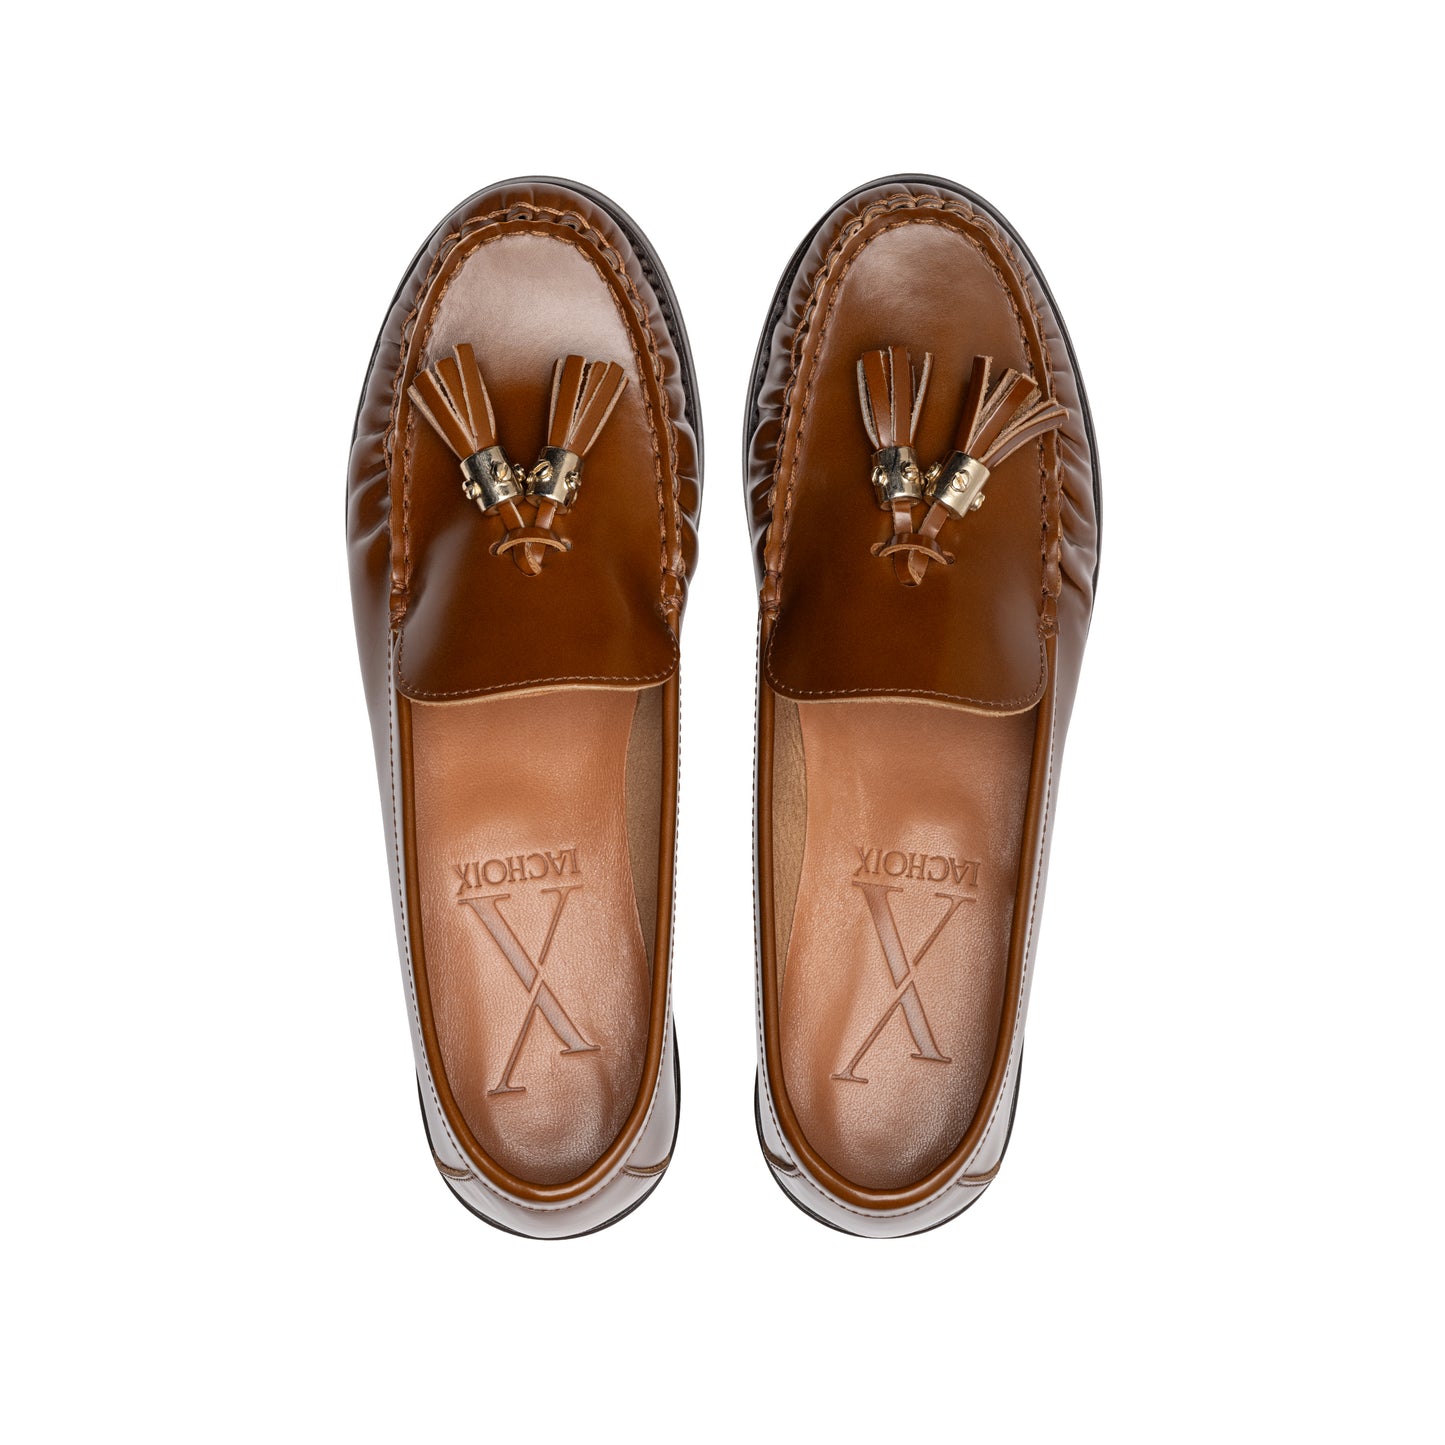 Camel Glossy Leather Moccasin